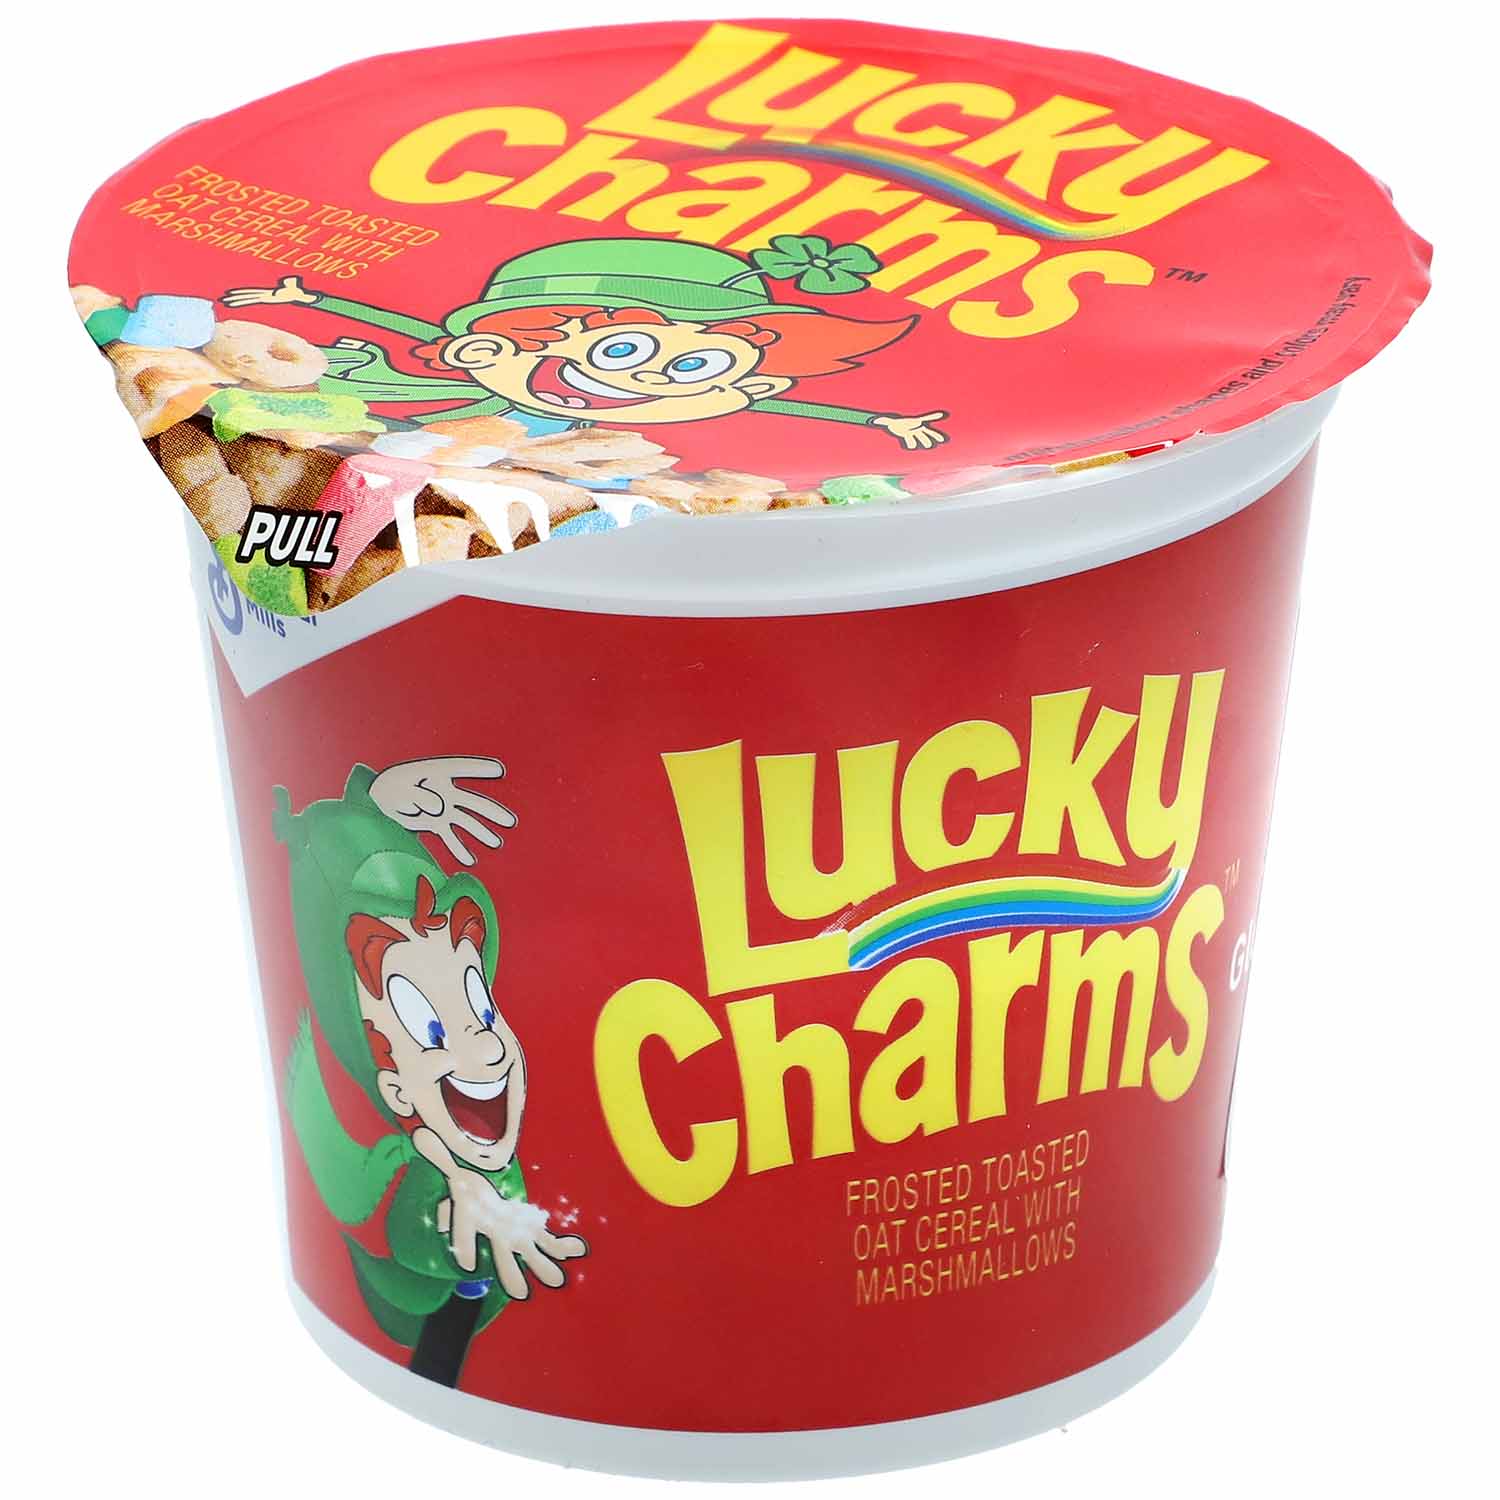 https://www.worldofsweets.de/out/pictures/master/product/1/lucky-charms-48g-no1-5853.jpg